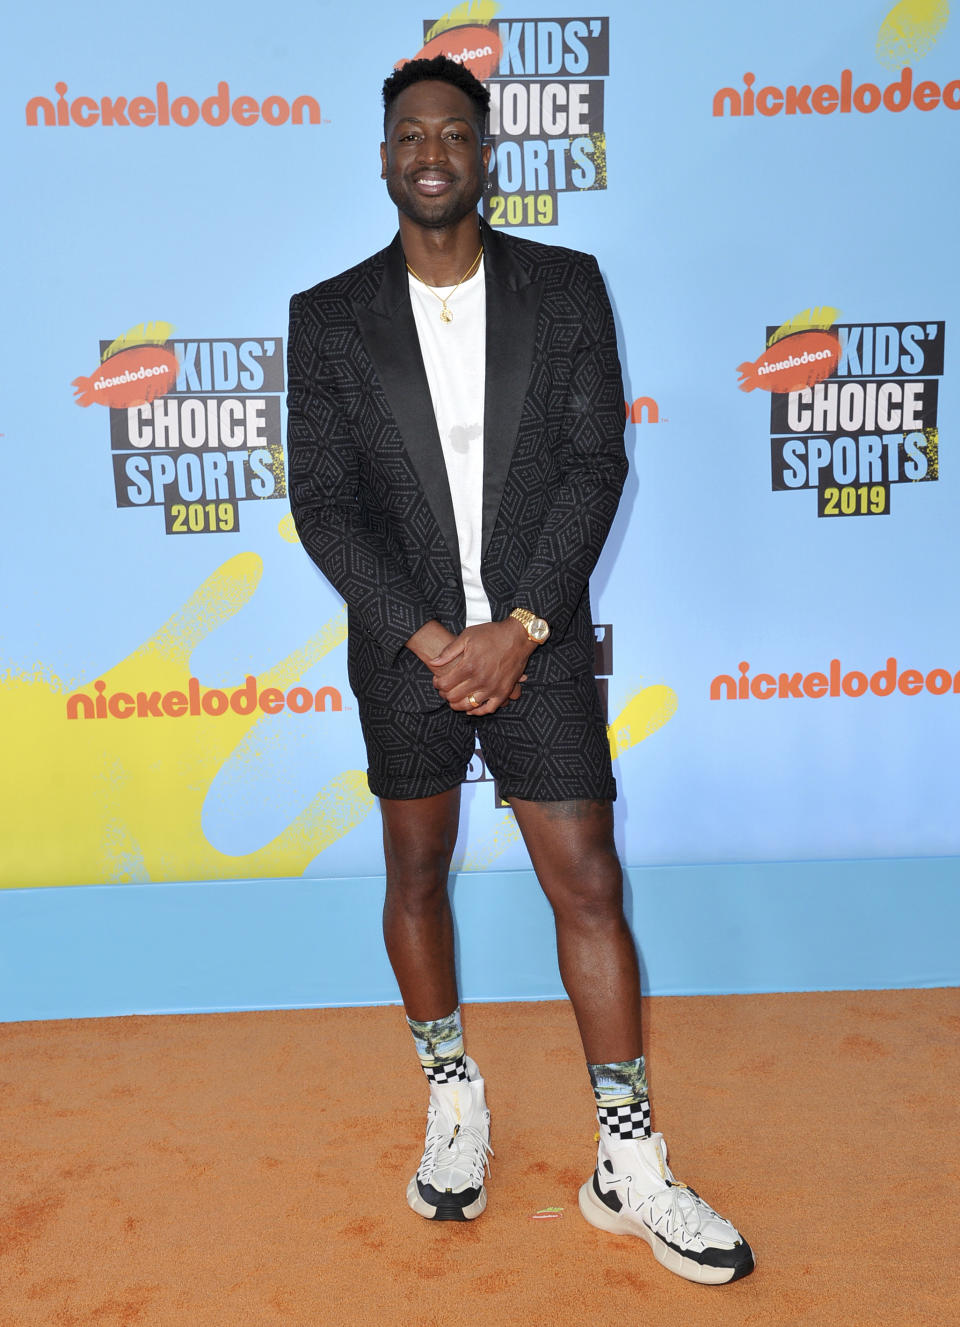 Dwyane Wade arrives at the Kids' Choice Sports Awards on Thursday, July 11, 2019, at the Barker Hangar in Santa Monica, Calif. (Photo by Richard Shotwell/Invision/AP)